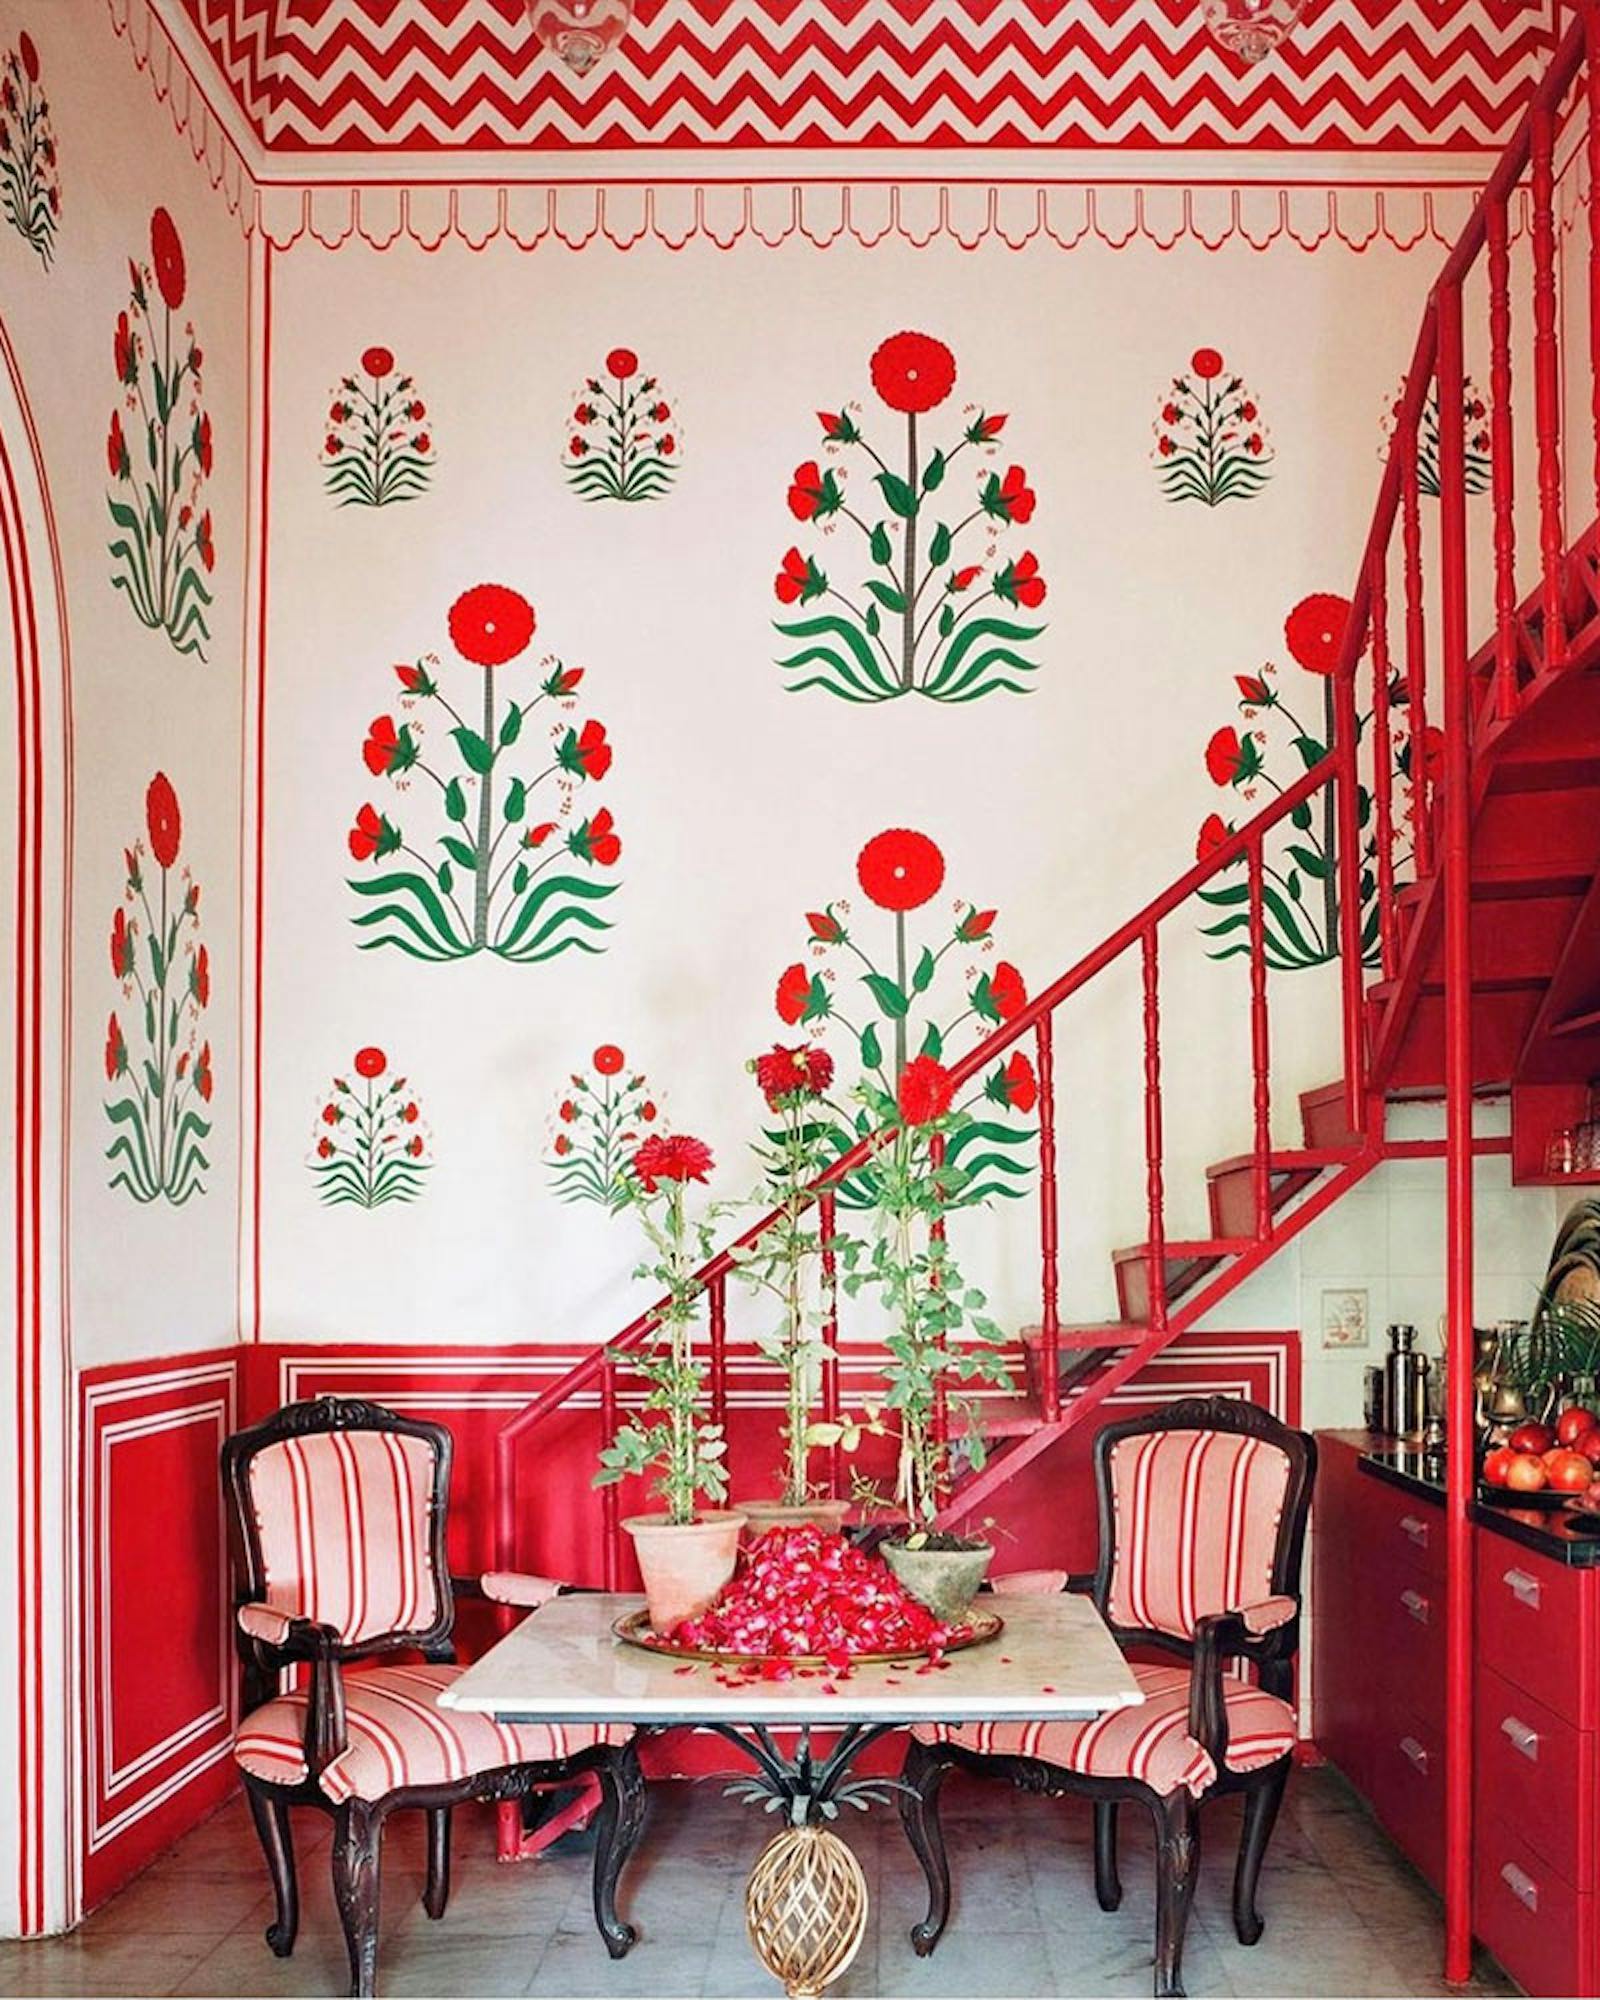 India interior with red